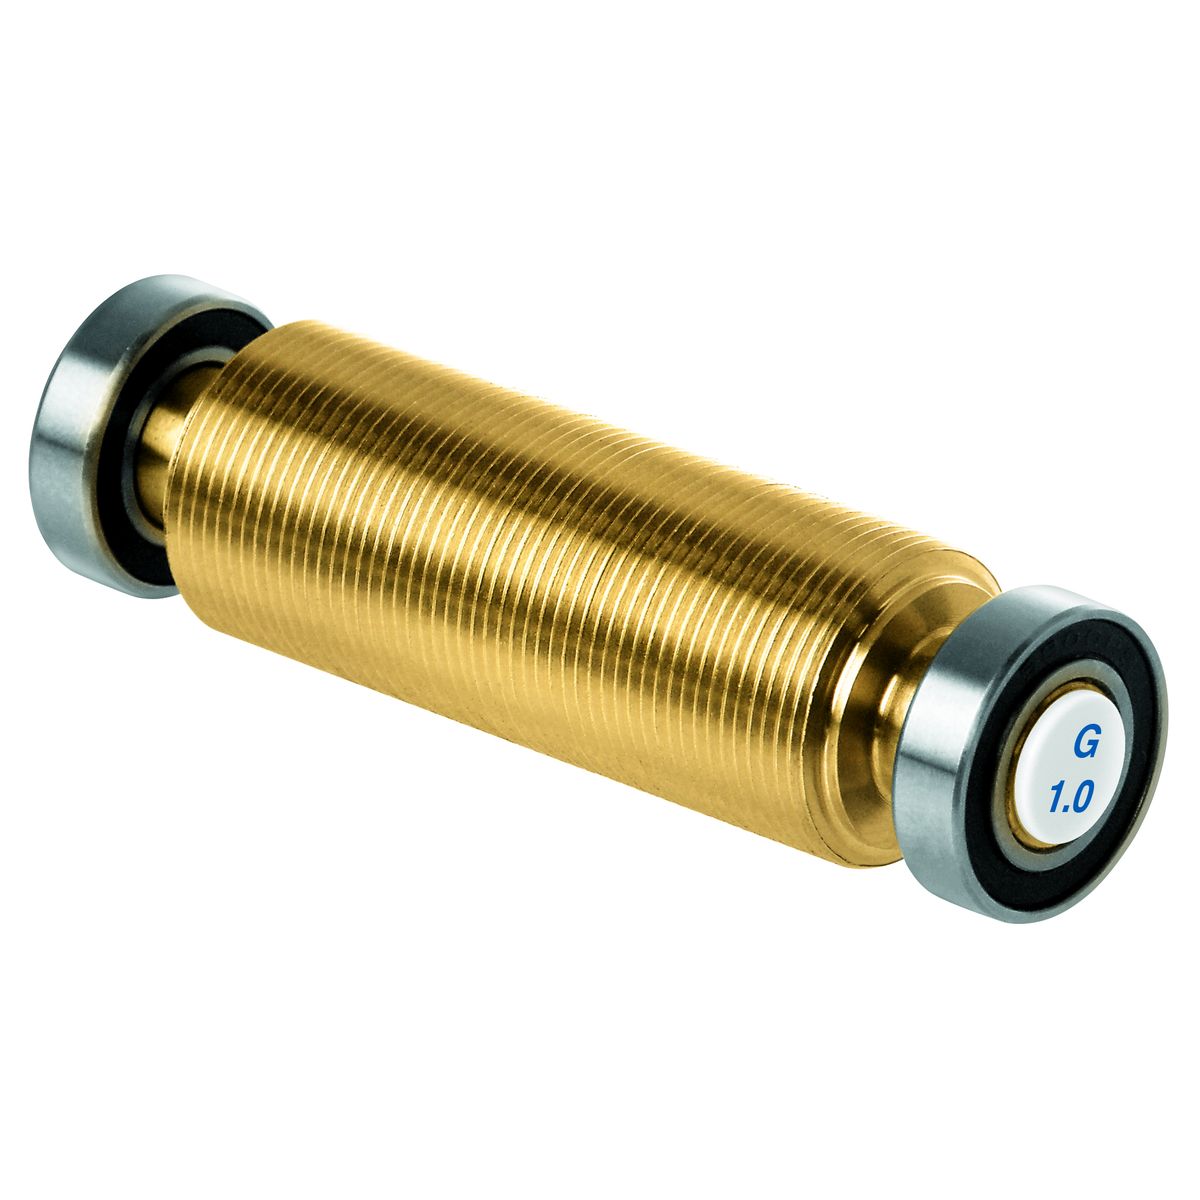 1.0 mm Linear Structure Roller for T0424